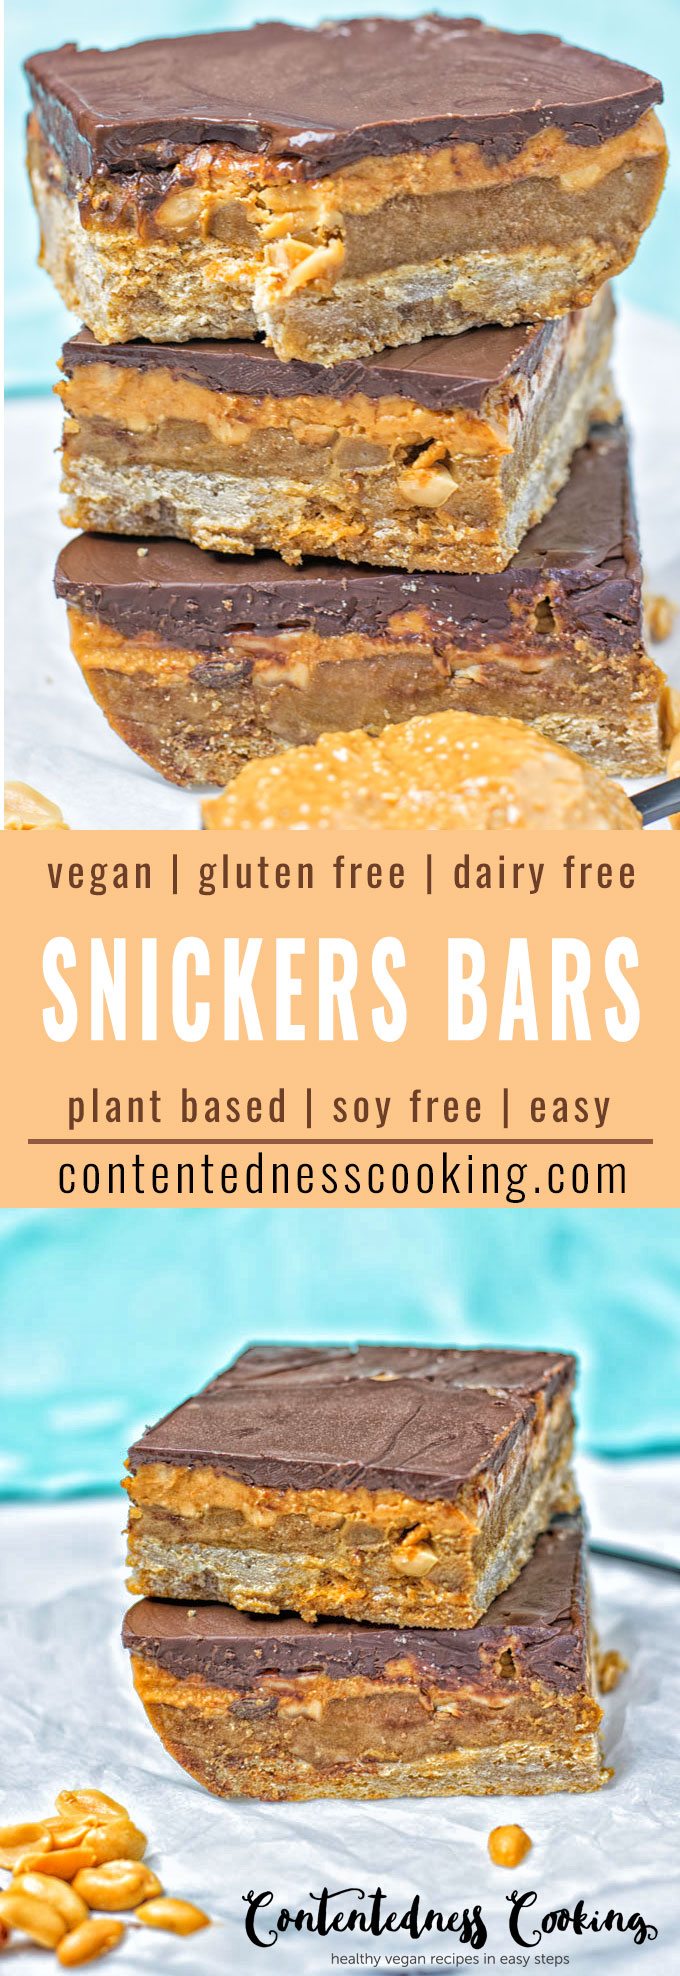 Collage of two pictures of the Vegan Snickers Bars with recipe title text.